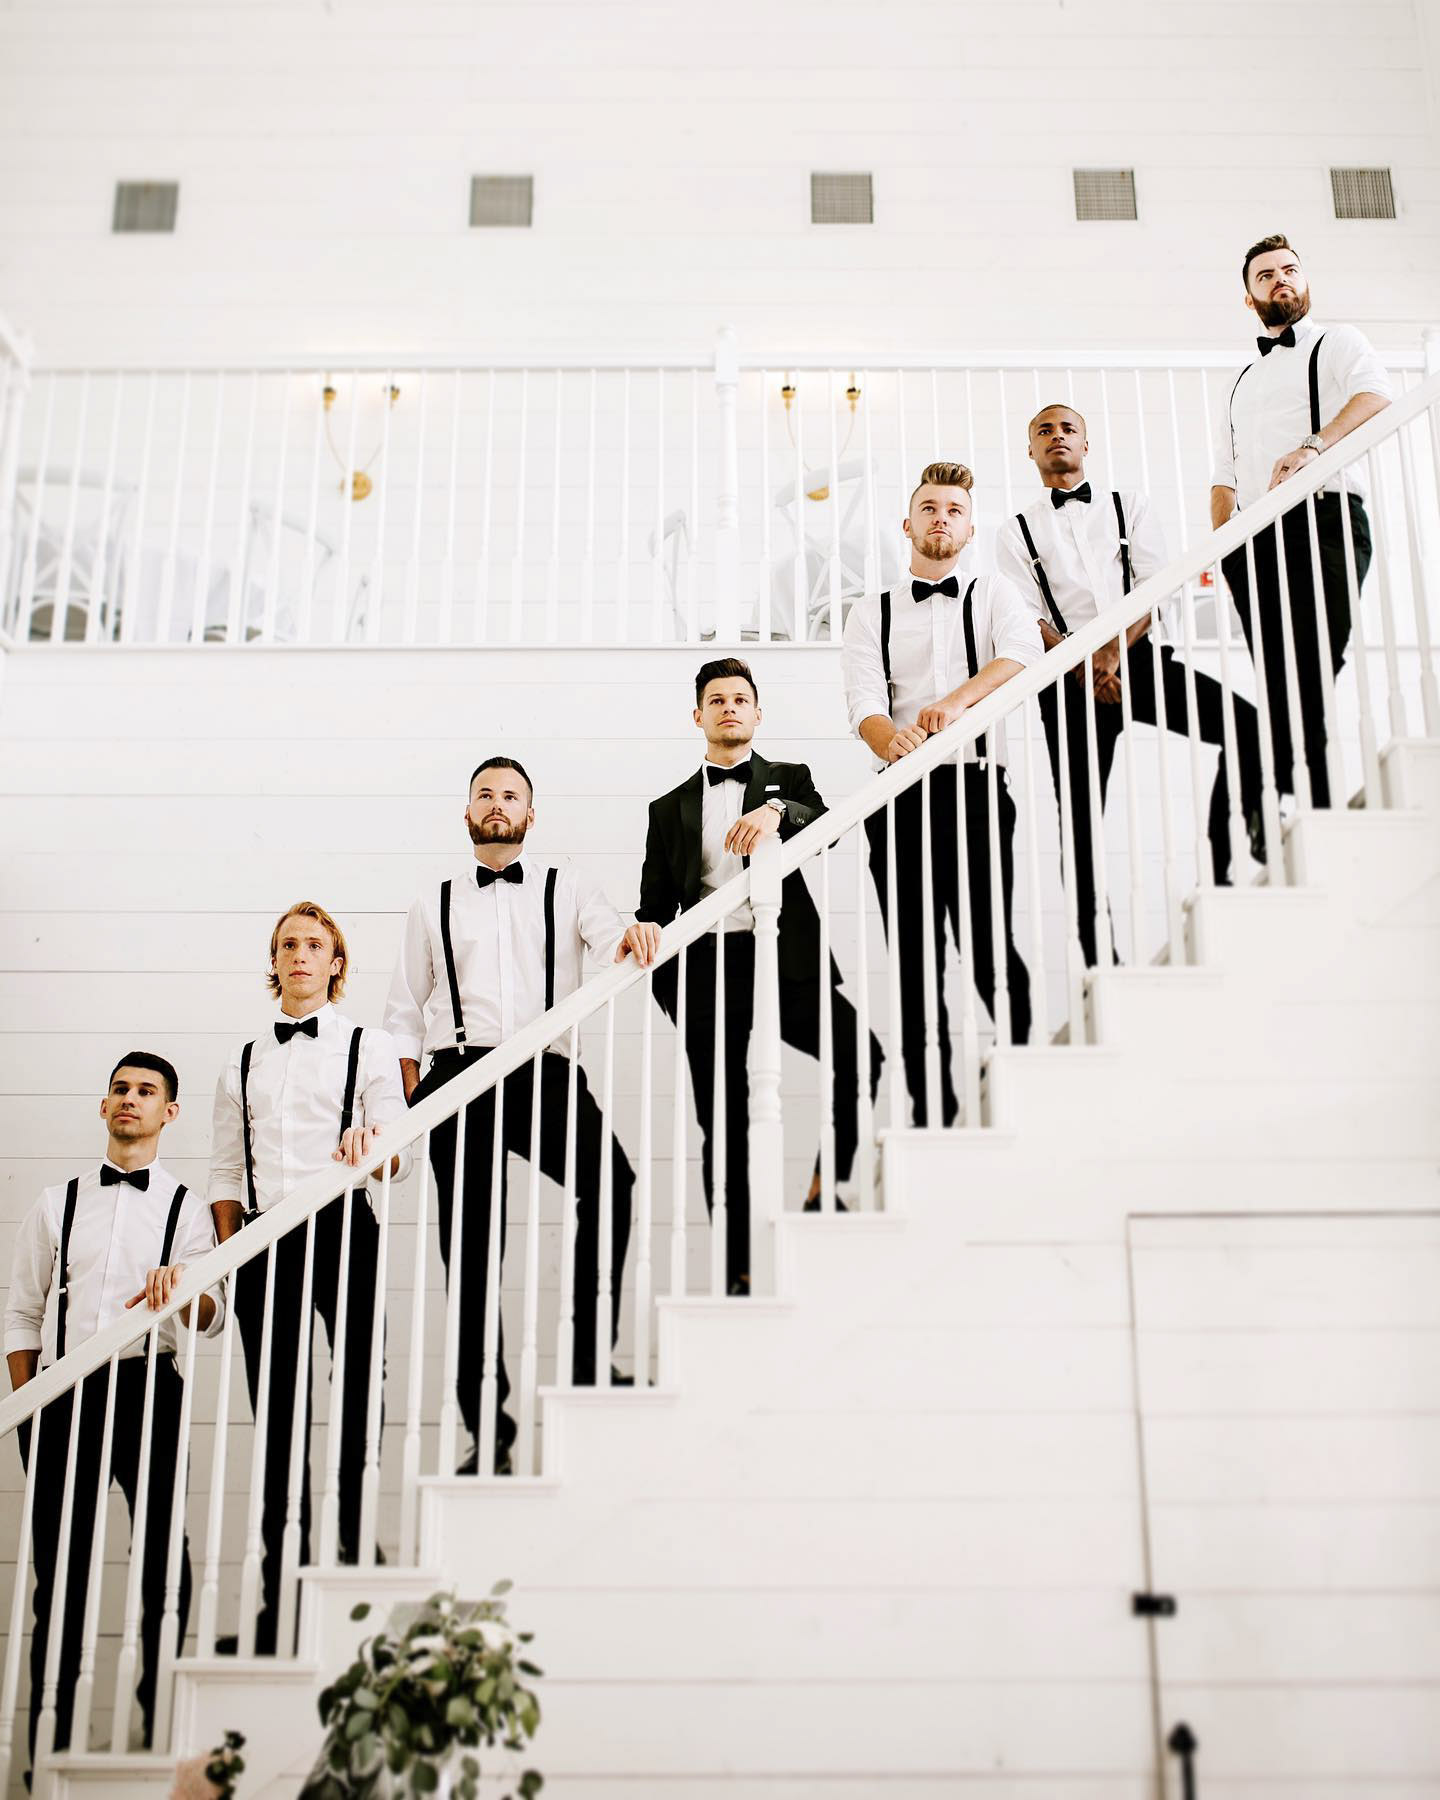 the groom and the groomsmen standing on a staircase posing in formal attire